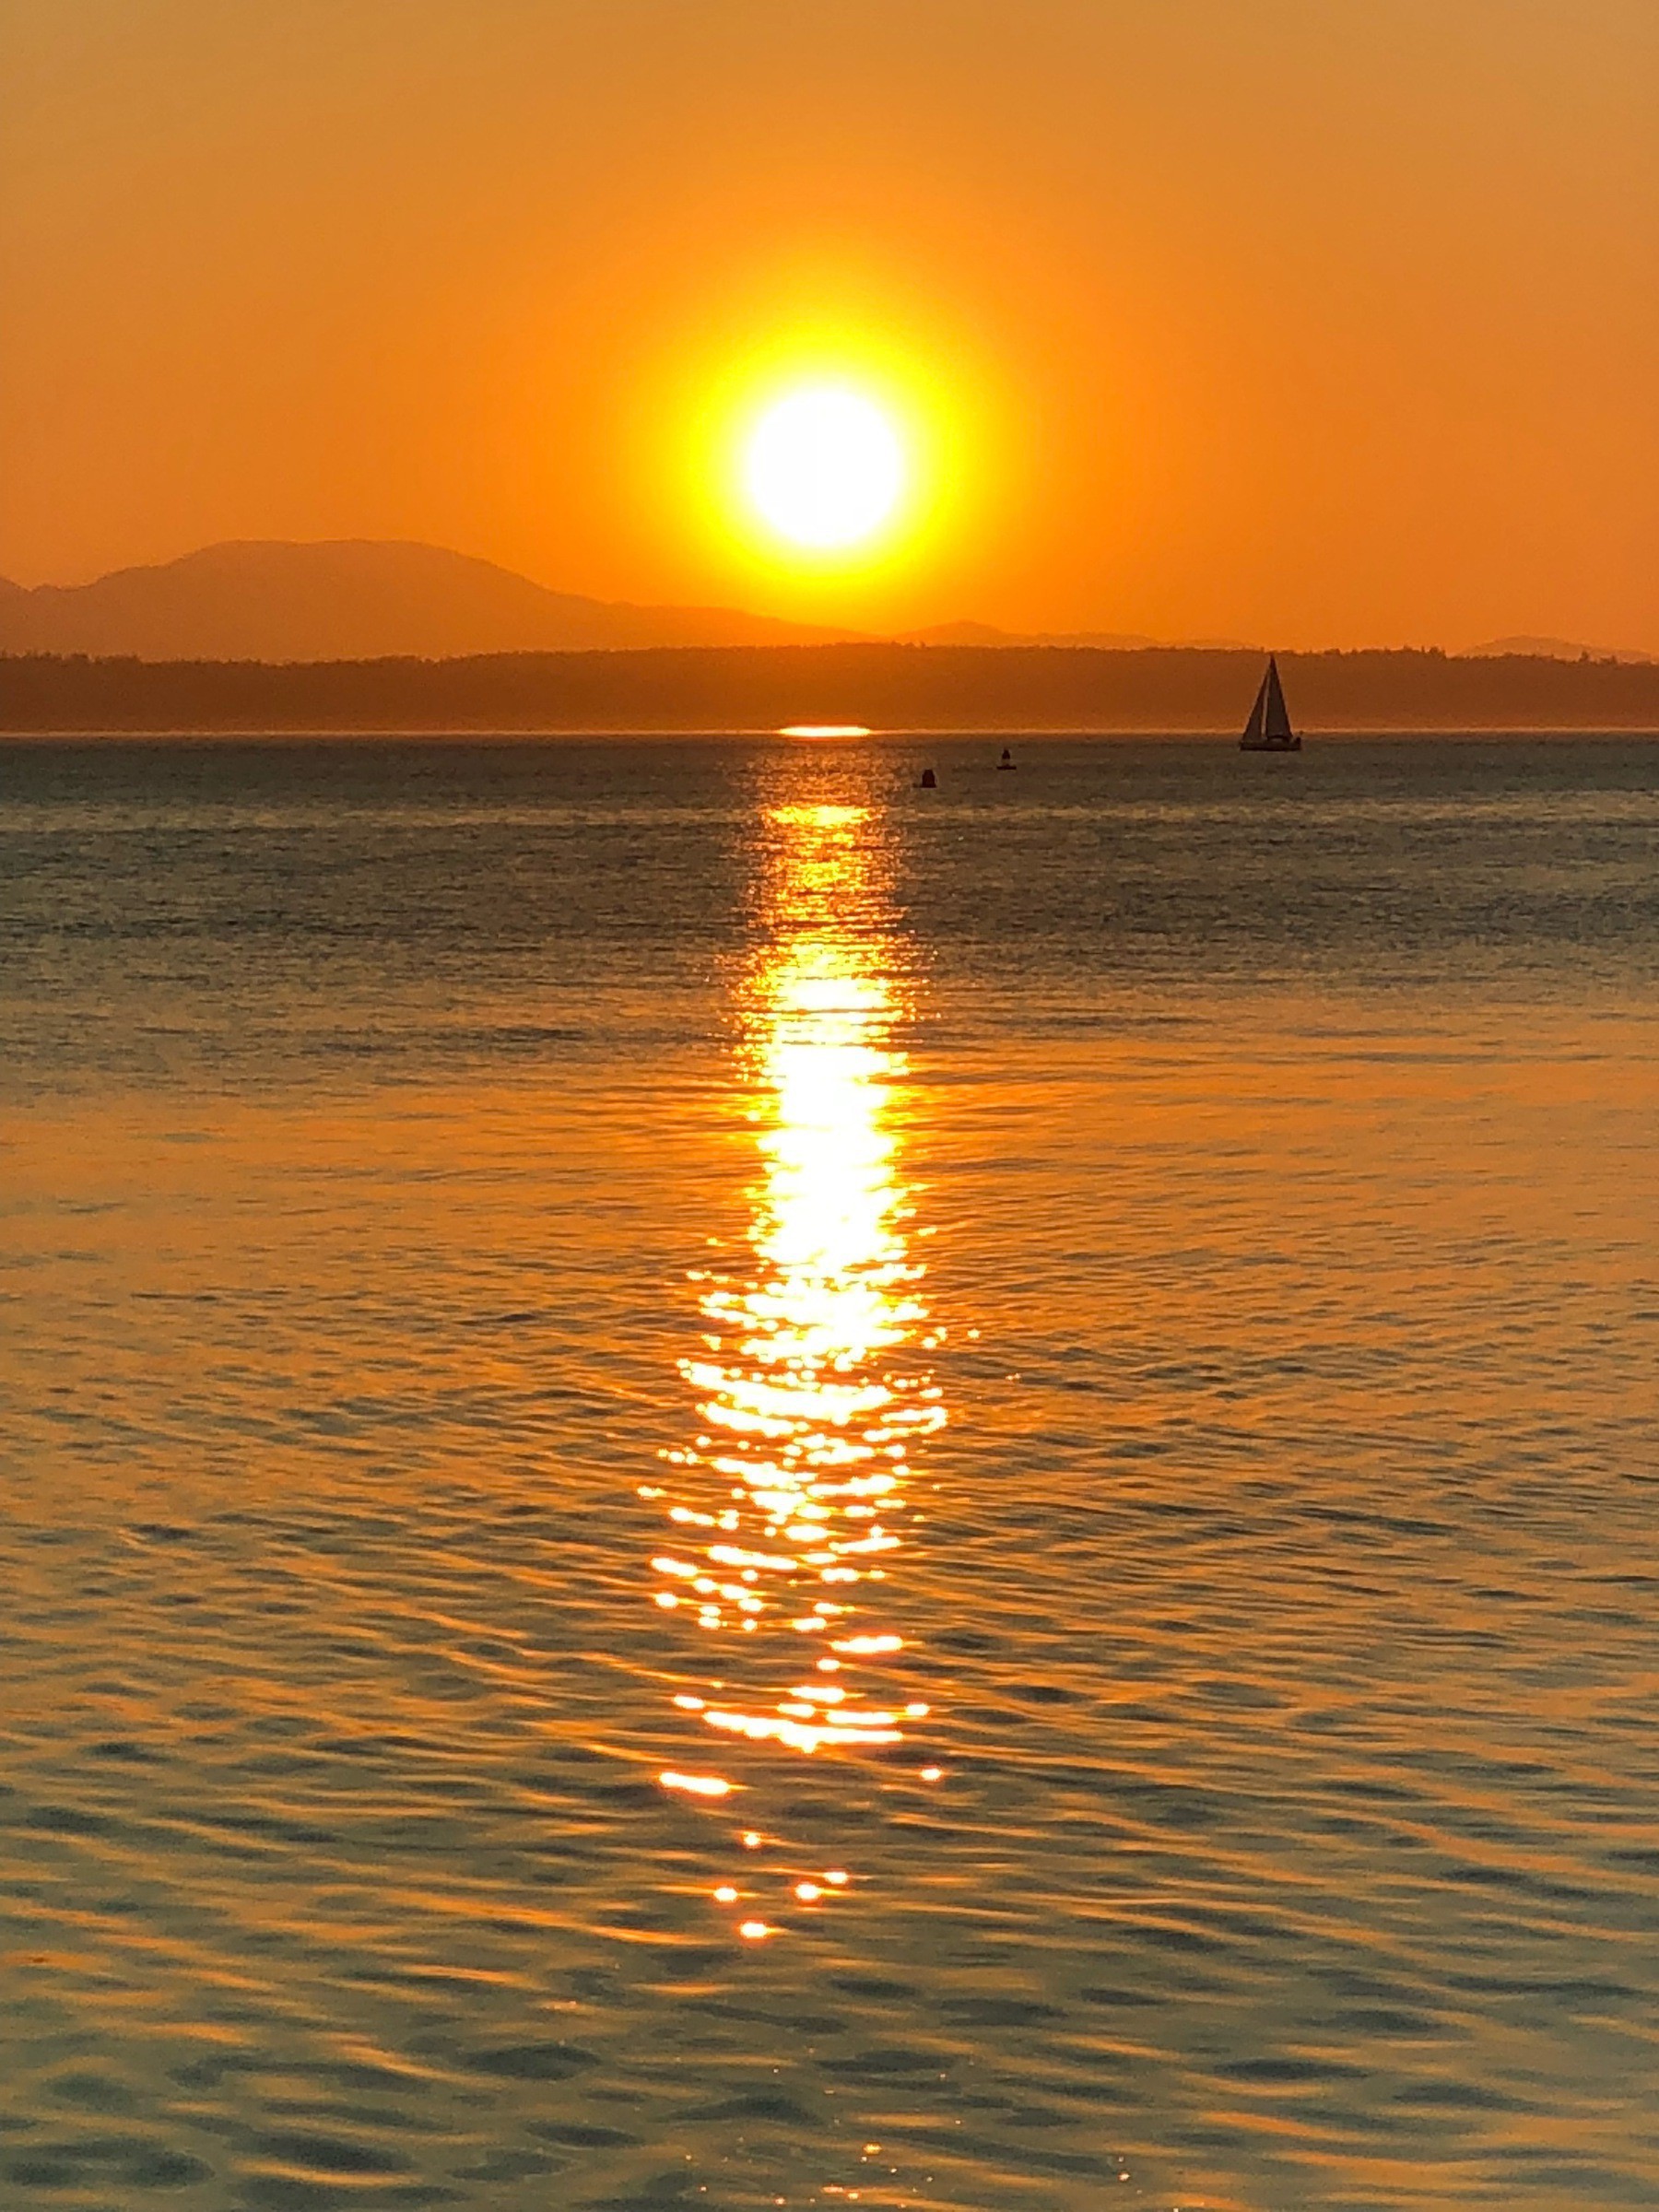 The sun is setting over the Olympics. There are sailboats in Puget Sound.